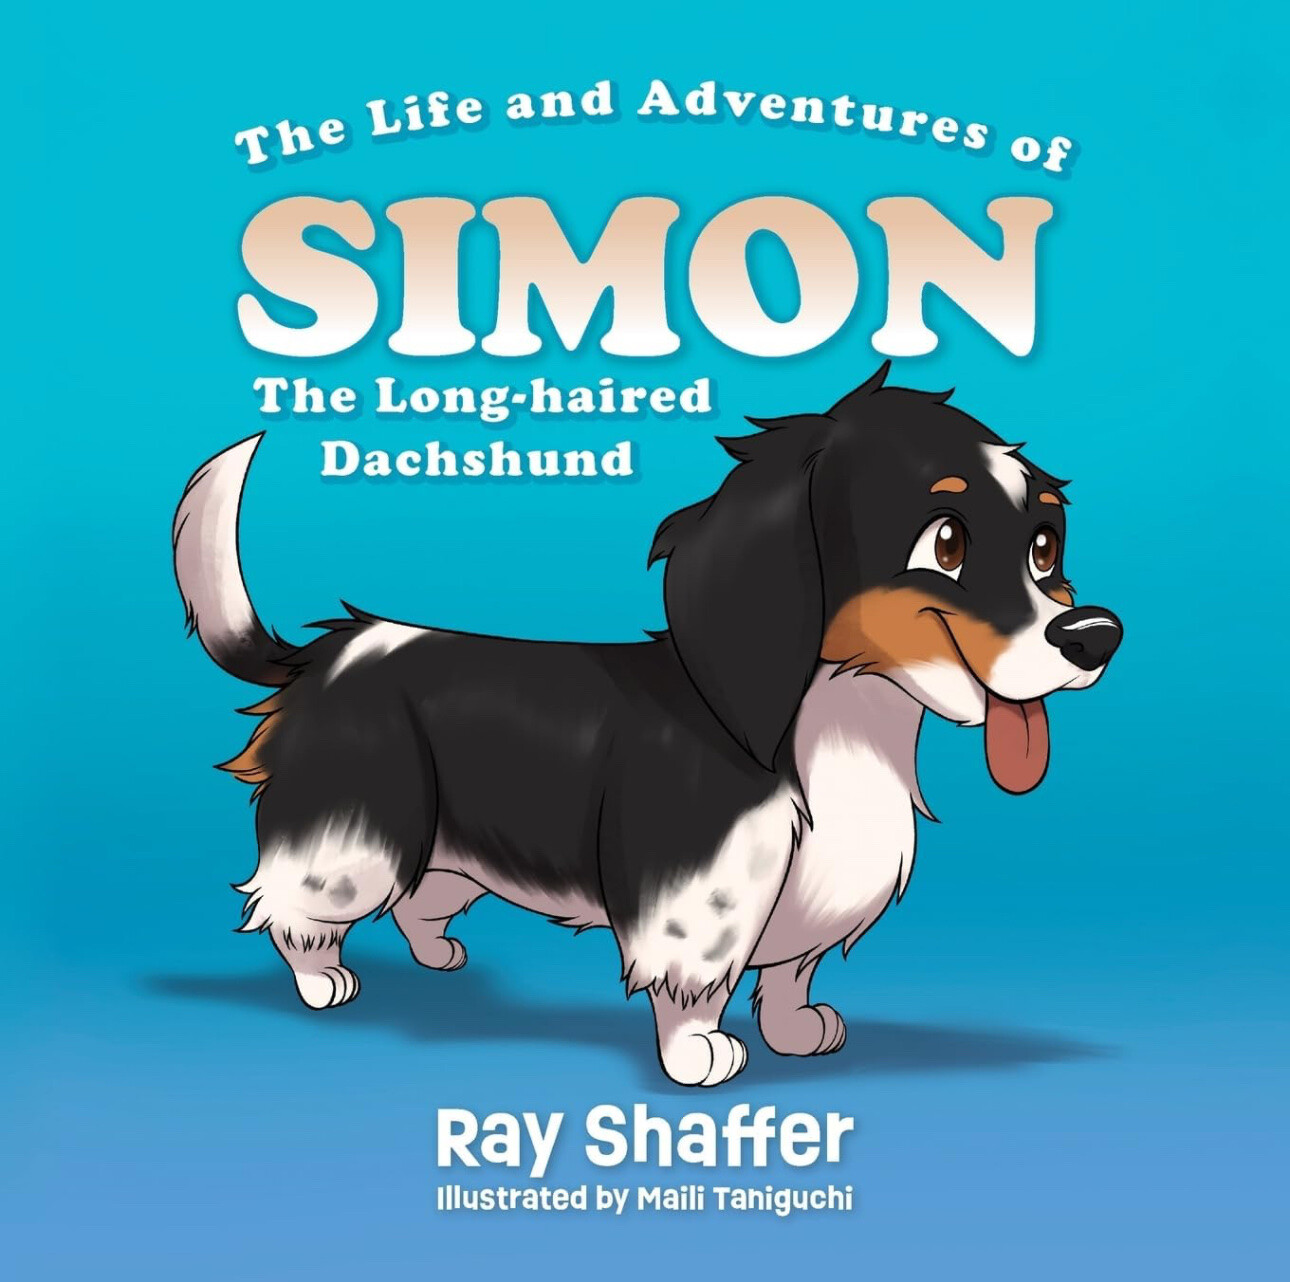 The Life and Adventures of Simon the Long-haired Dachshund